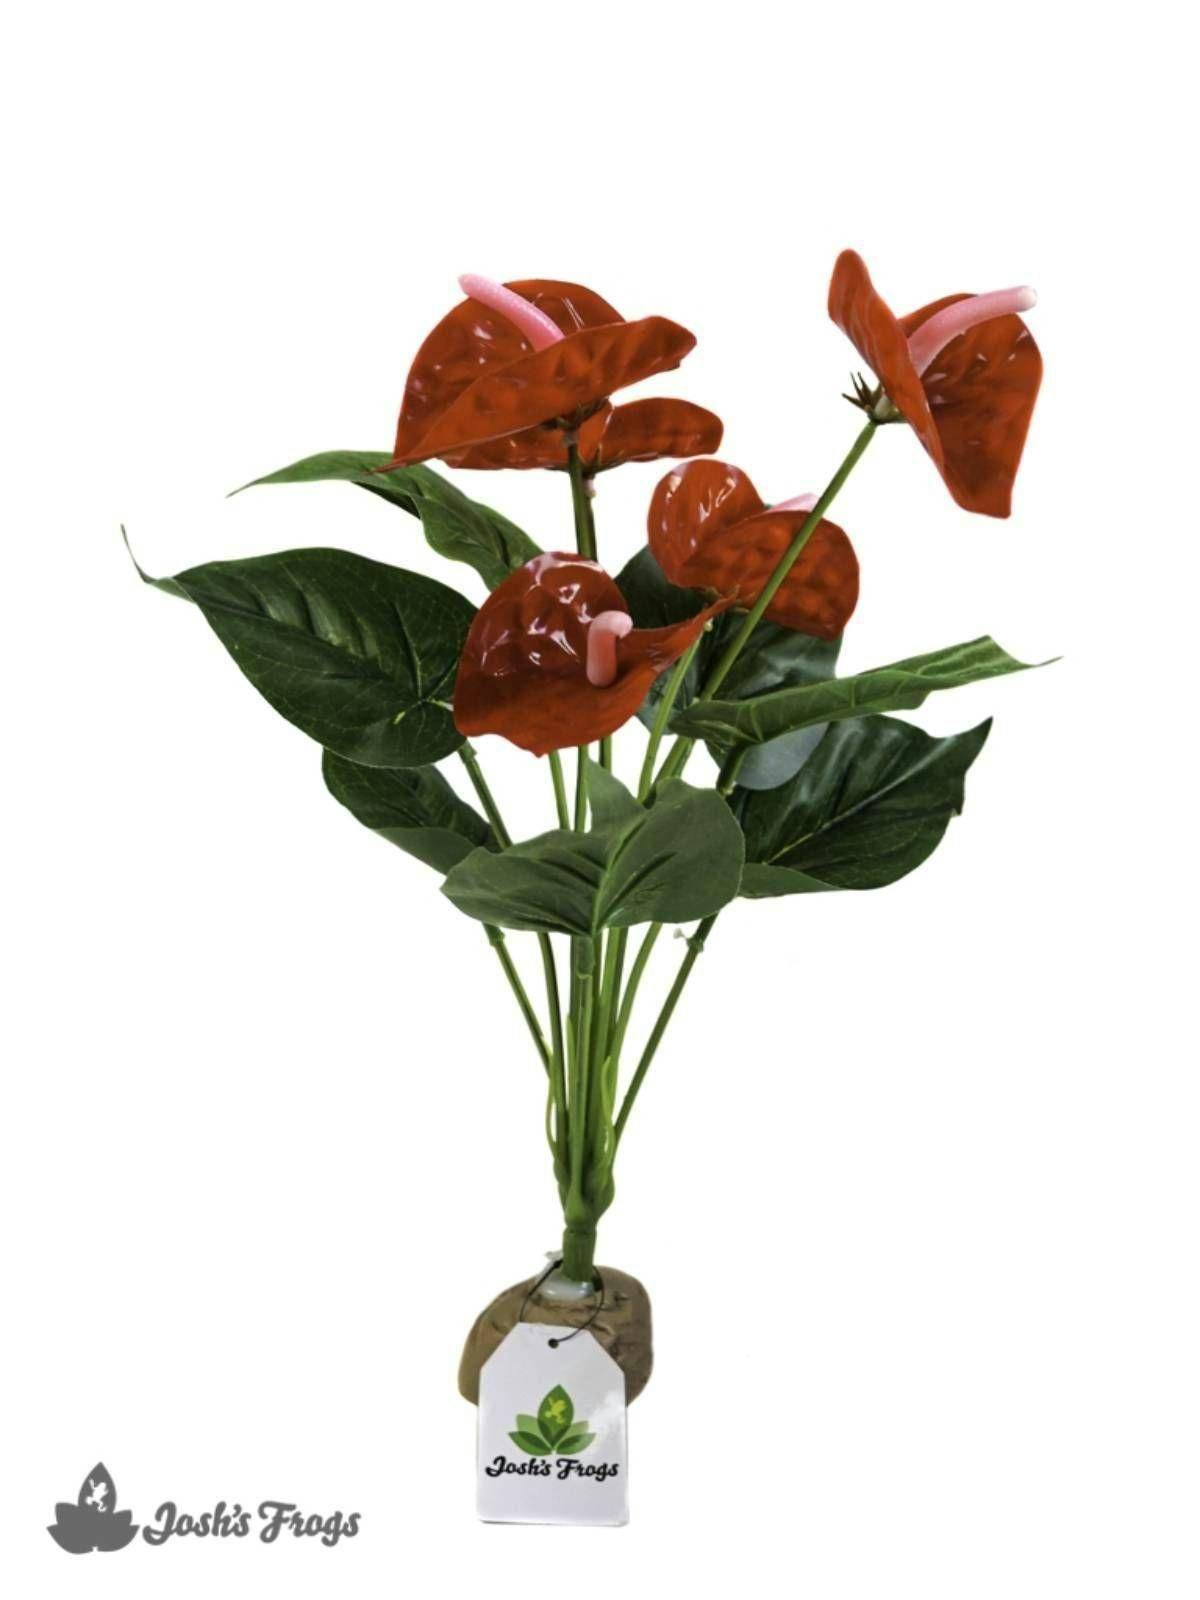 Image for Josh's Frogs Artificial Anthurium Bush by Josh's Frogs